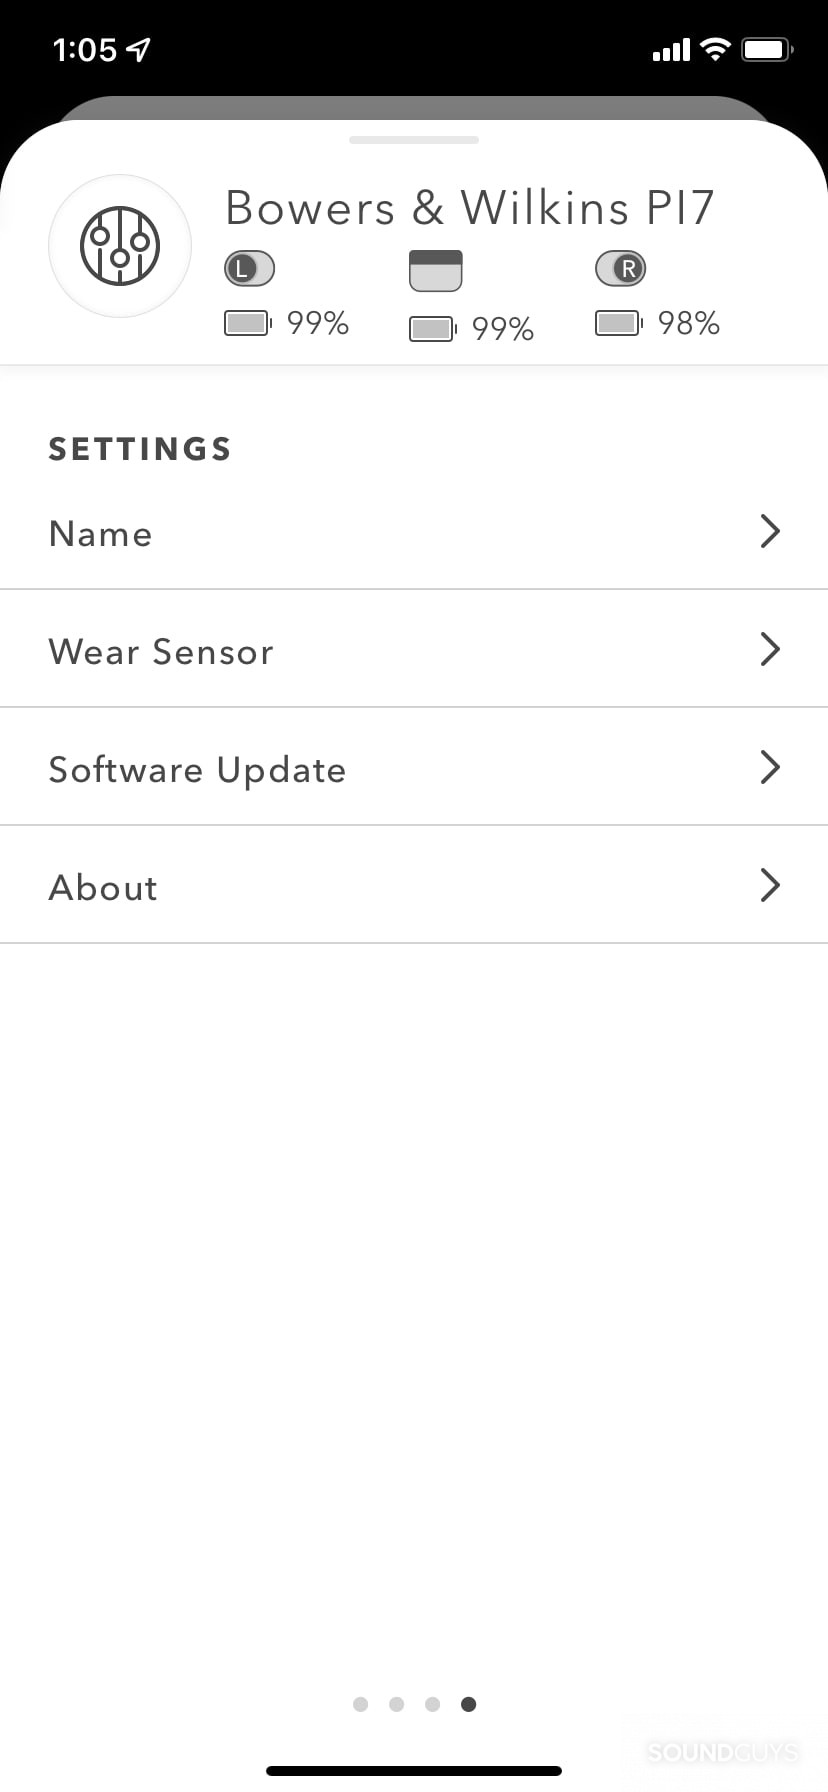 Bowers and Wilkins app showing options for software update and wear sensor.